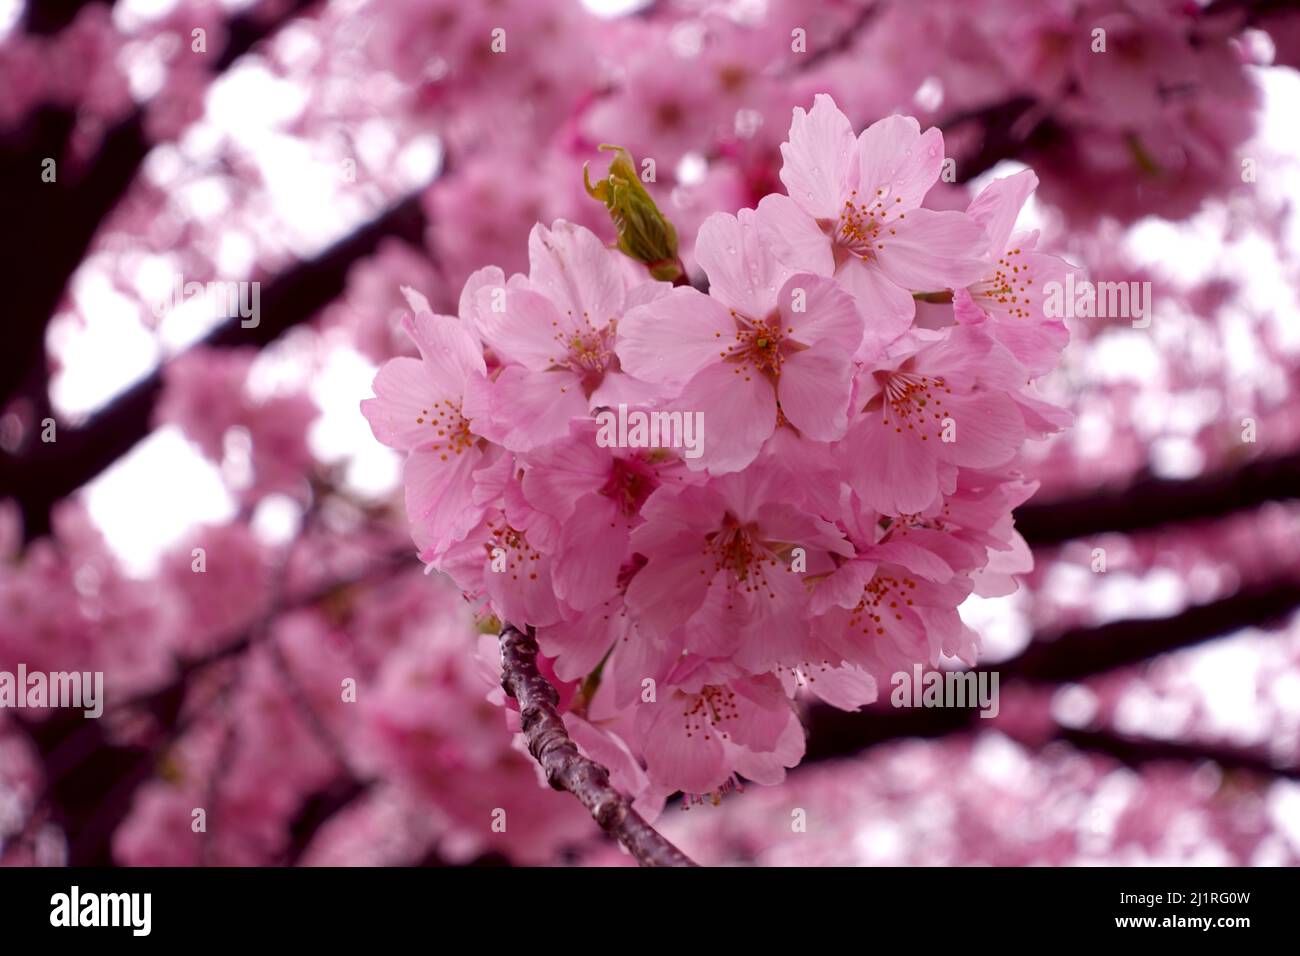 Cherry blossoms bloom in the spring season in Japan. Japanese sakura flowers. Background and blog materials. Stock Photo